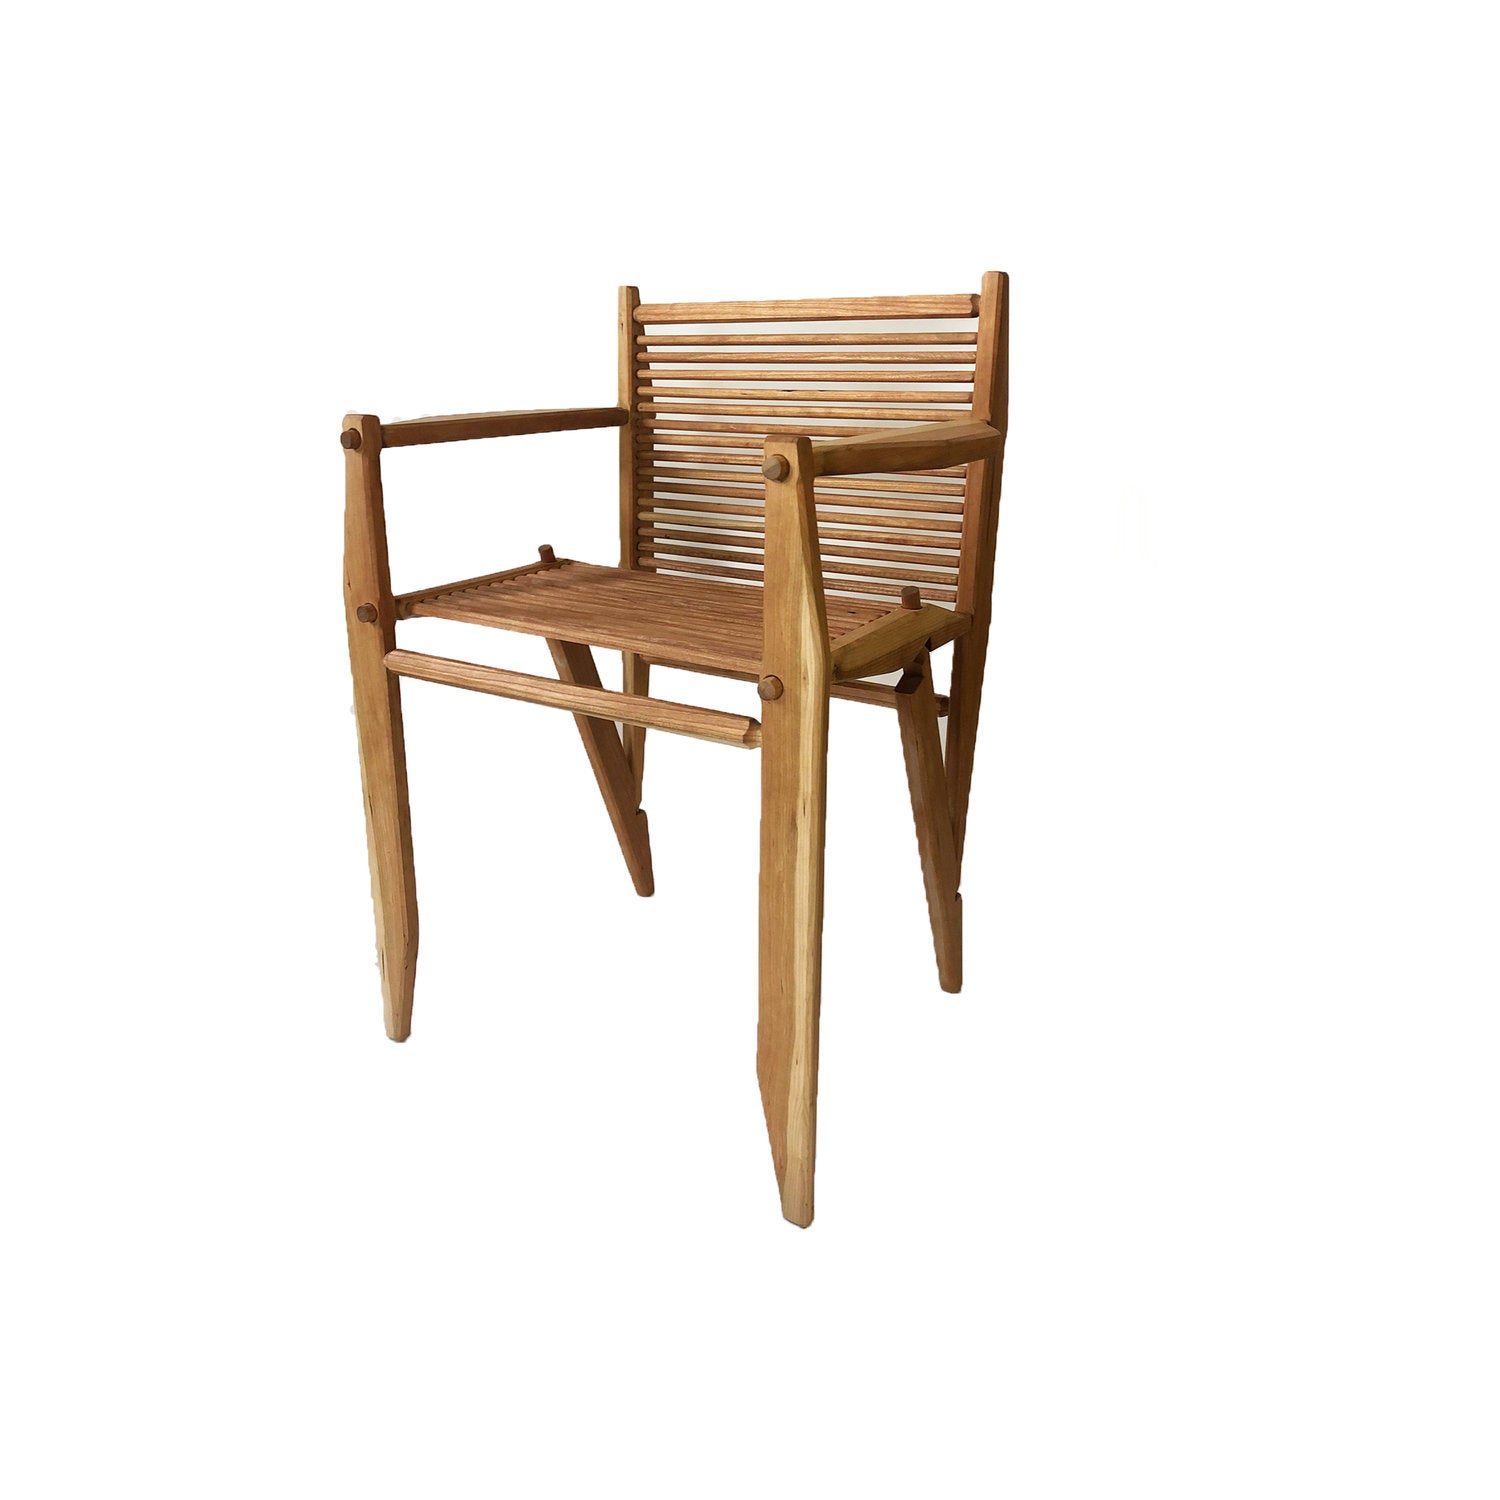 CHARLIE FROUD CHERRY WOOD CHAIRS